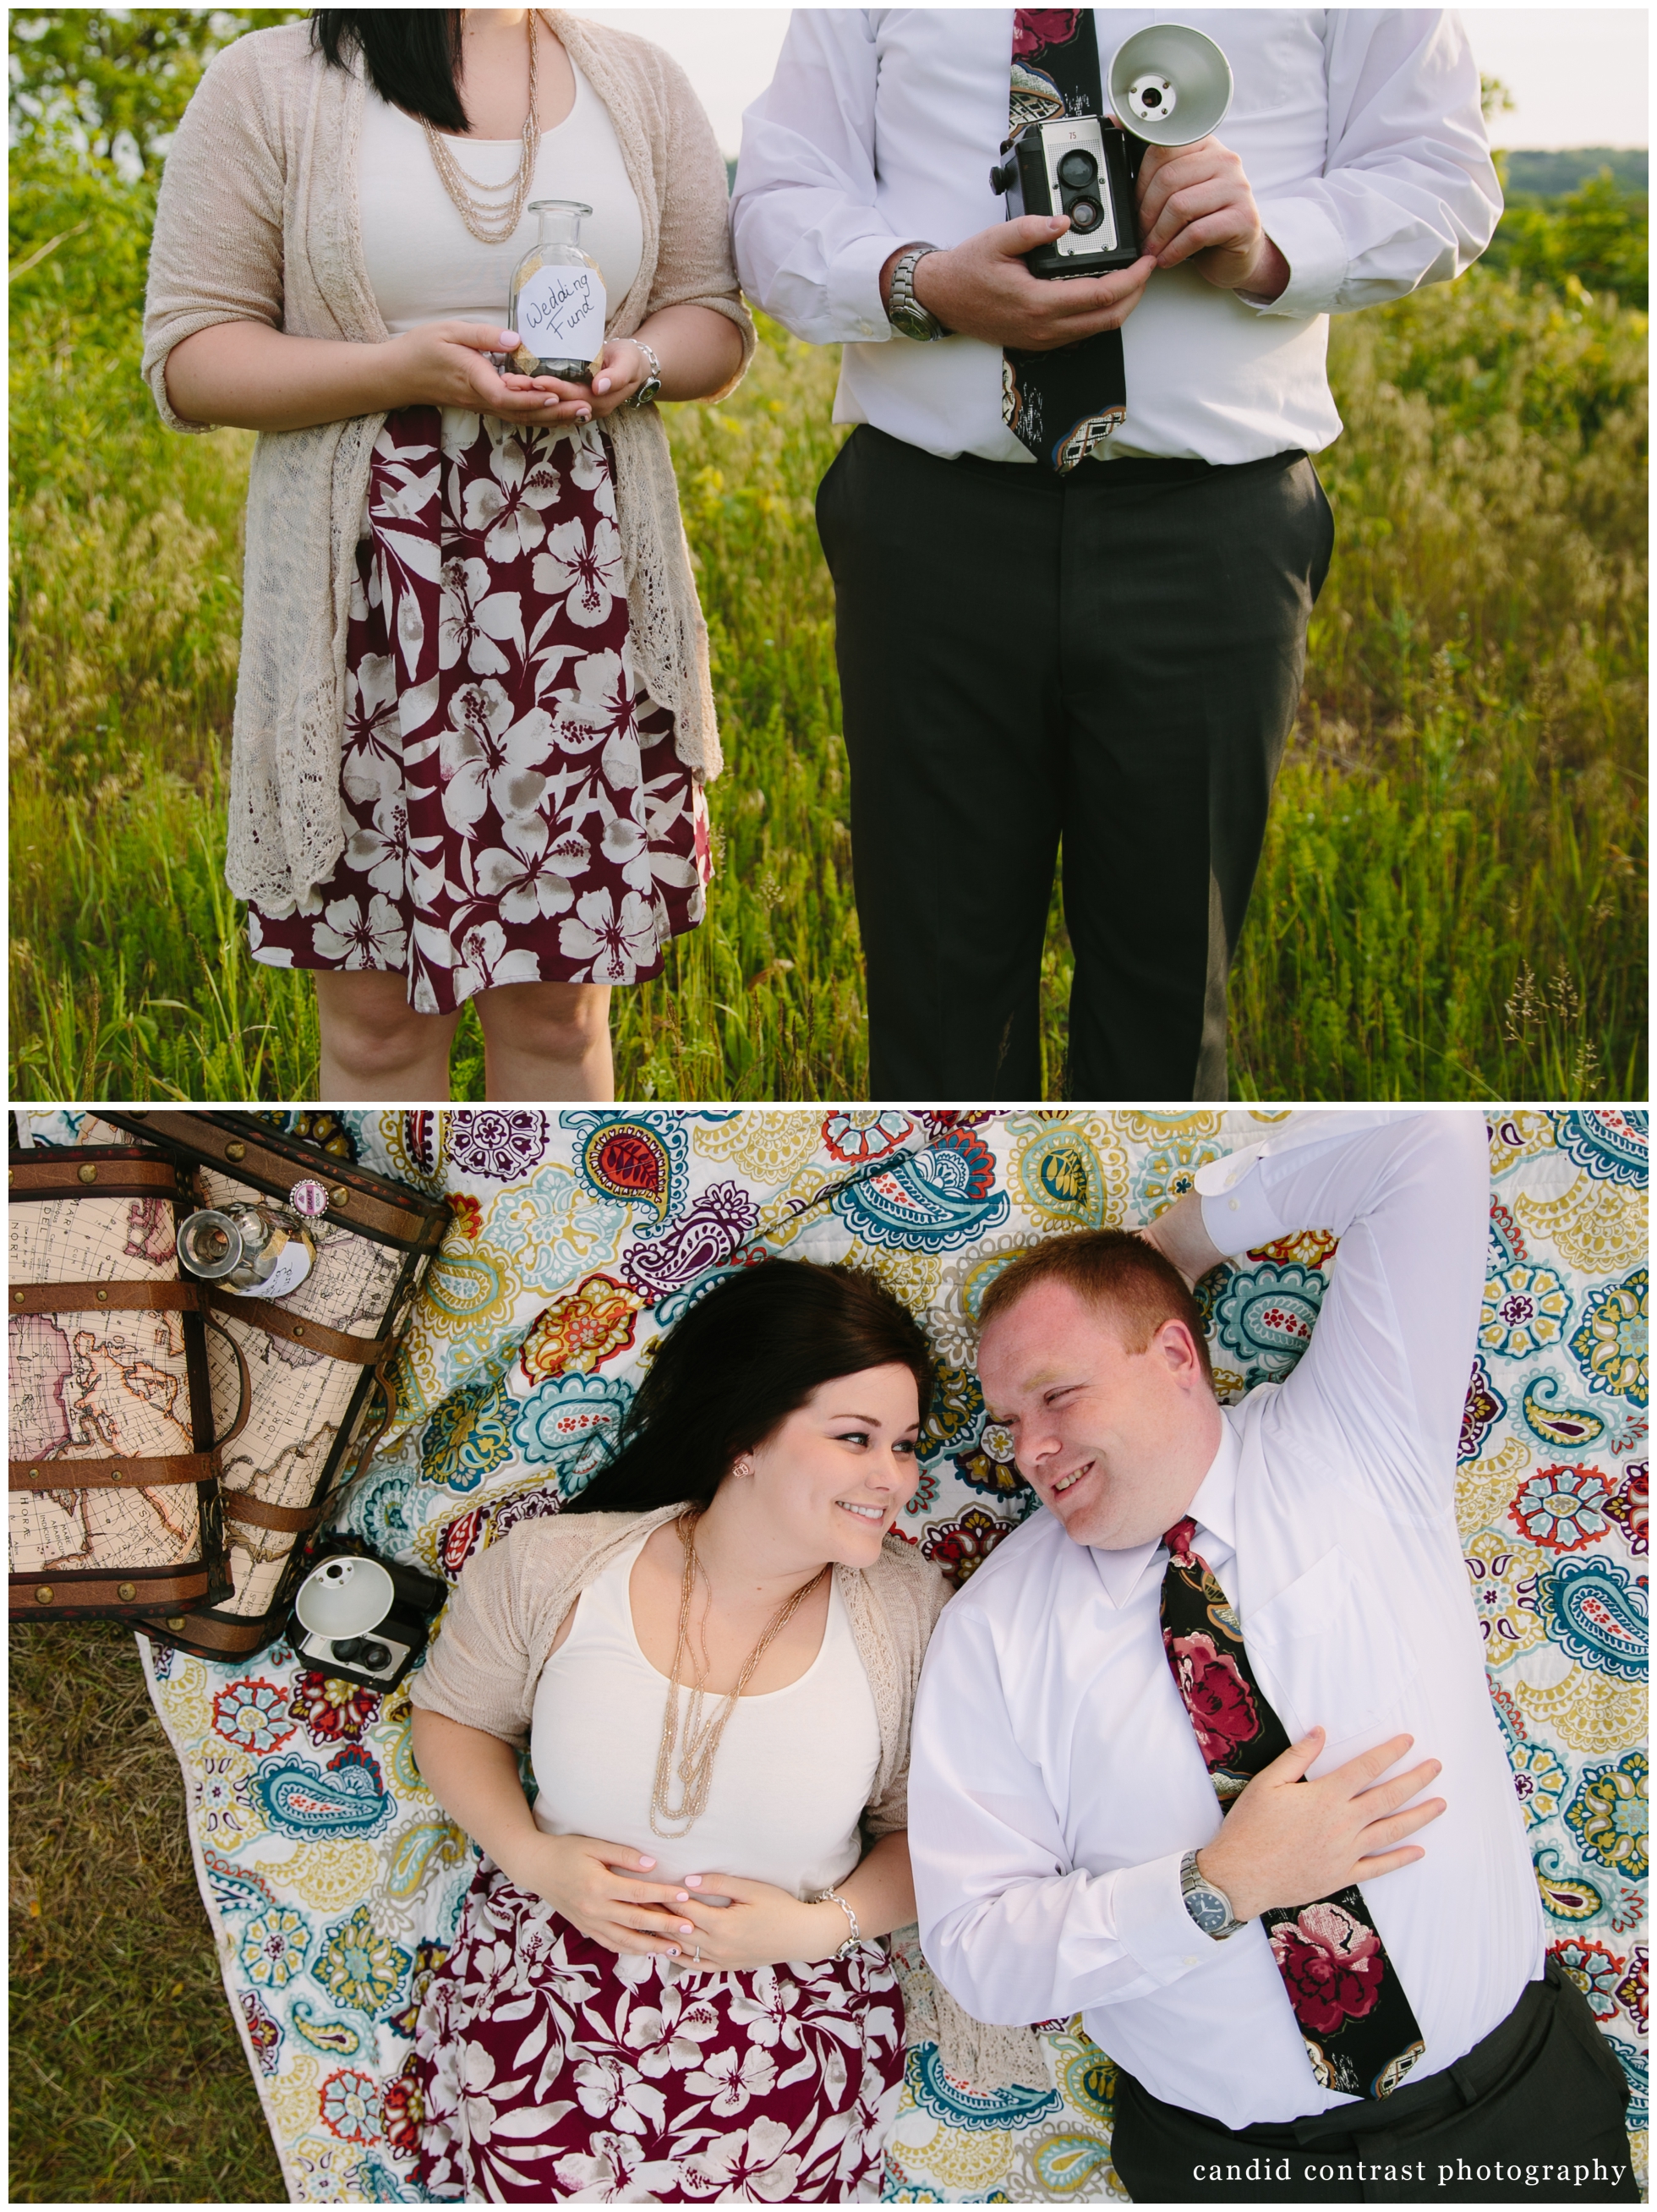 Disney UP themed engagement session in Dubuque, Iowa, Iowa wedding photographer Candid Contrast Photography